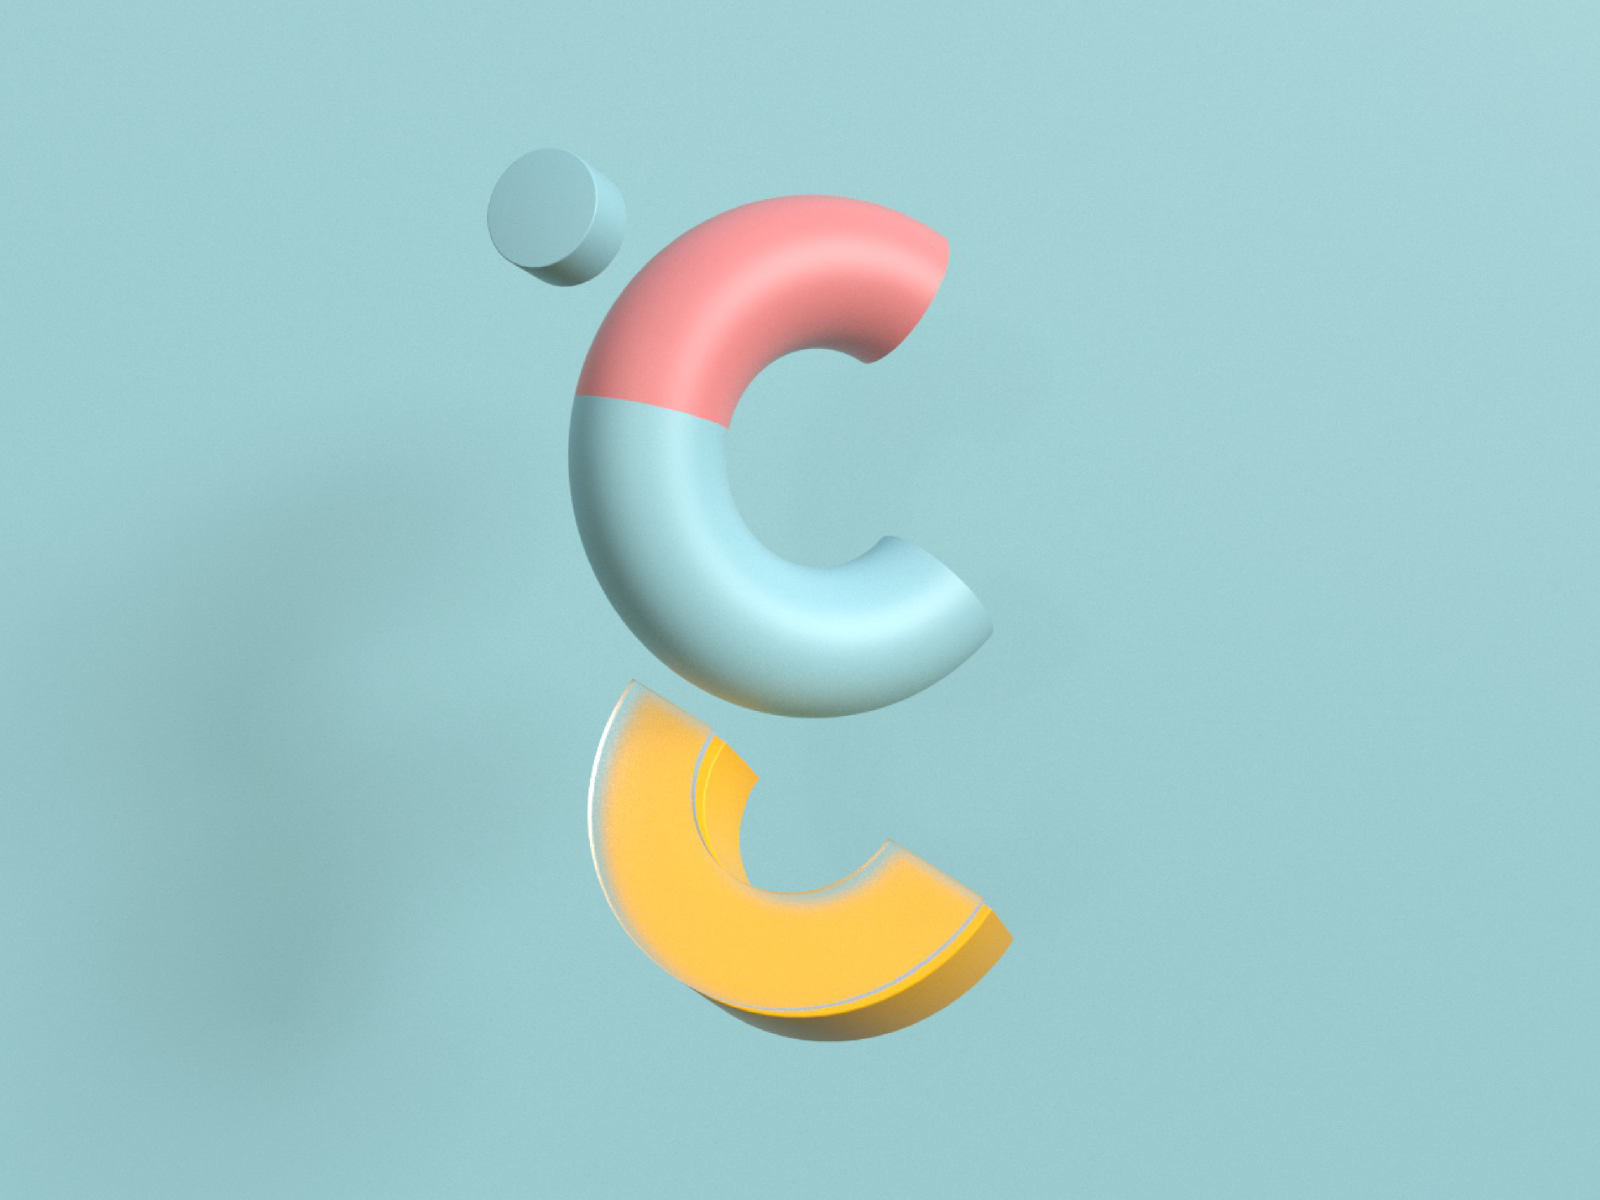 Gh Arabic 3D Abstract Letter by Hussein Alalosie on Dribbble